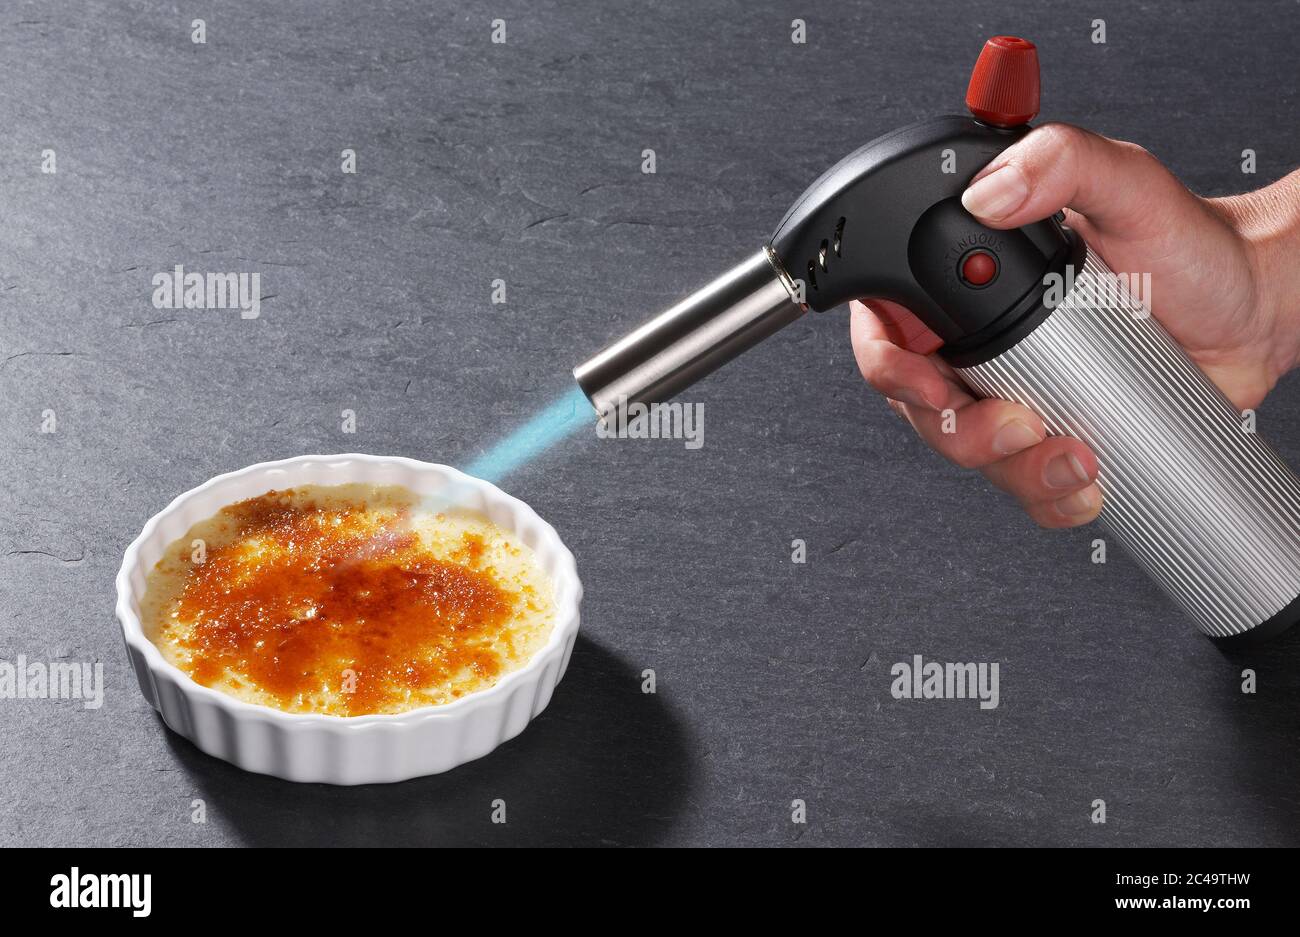 https://c8.alamy.com/comp/2C49THW/using-gas-blow-torch-to-flambe-pudding-2C49THW.jpg